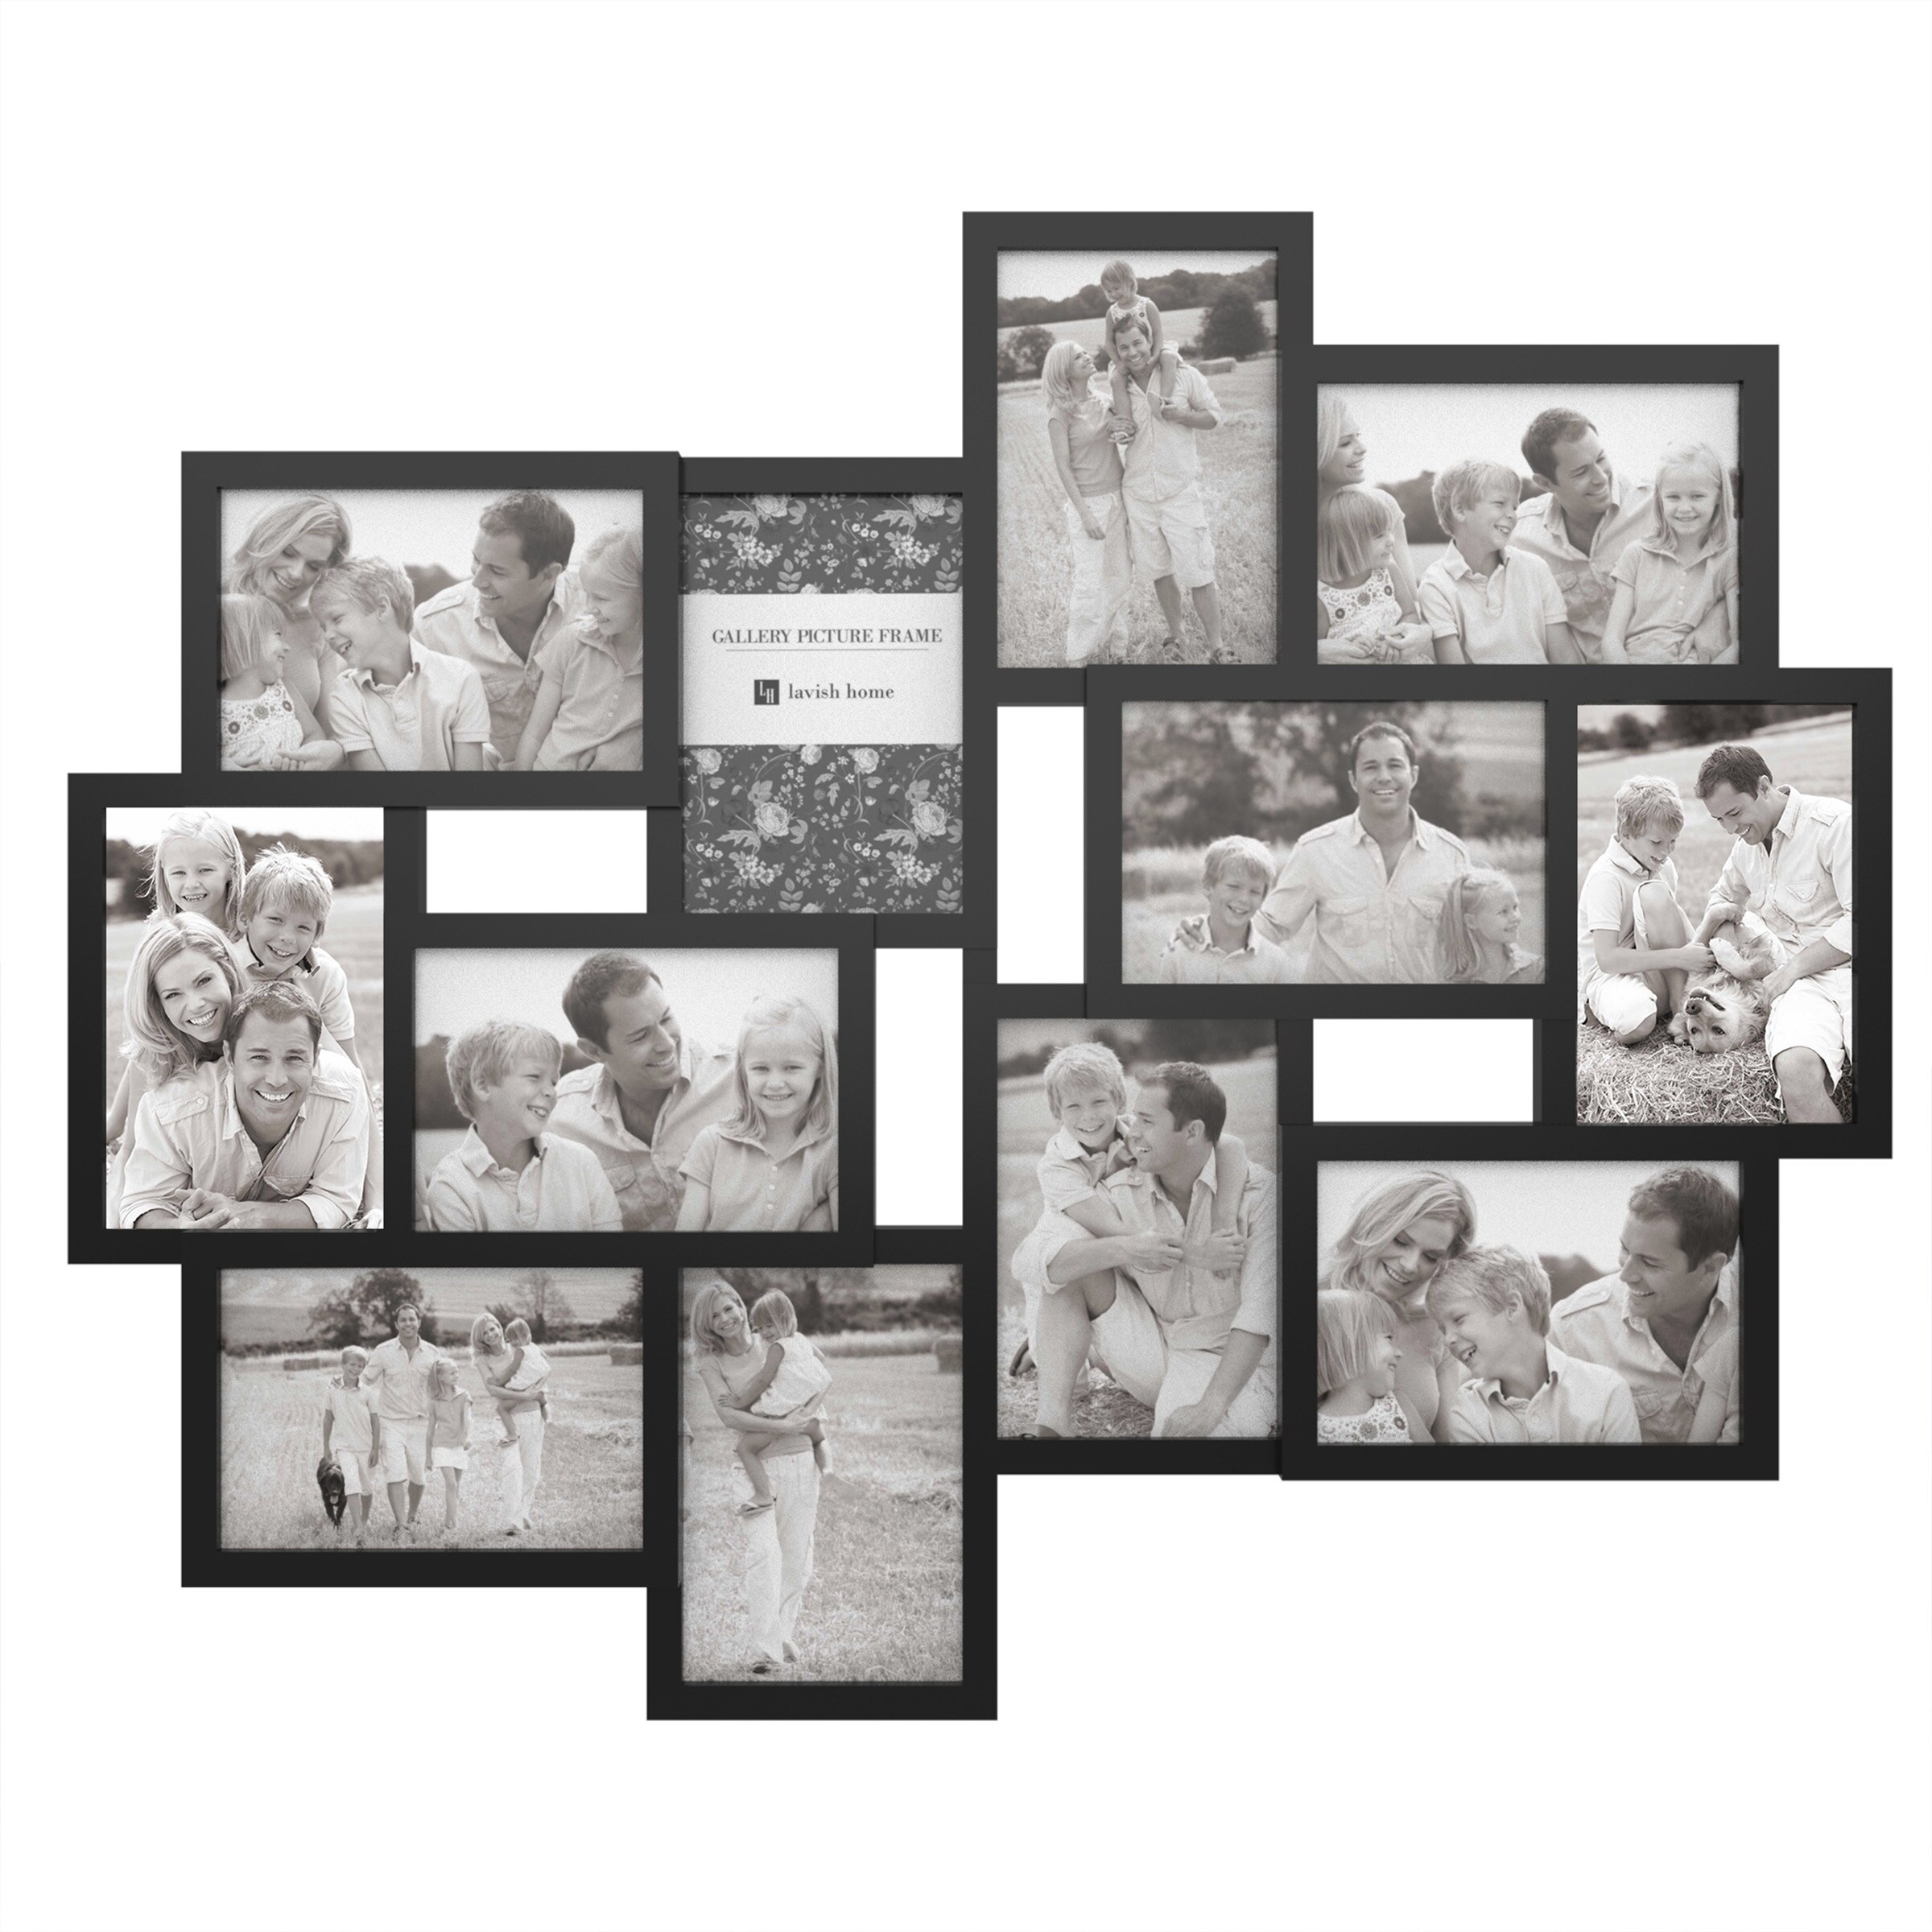 Printed Photo Collage Personalized Family 4x6 Tabletop Frame - Vertical